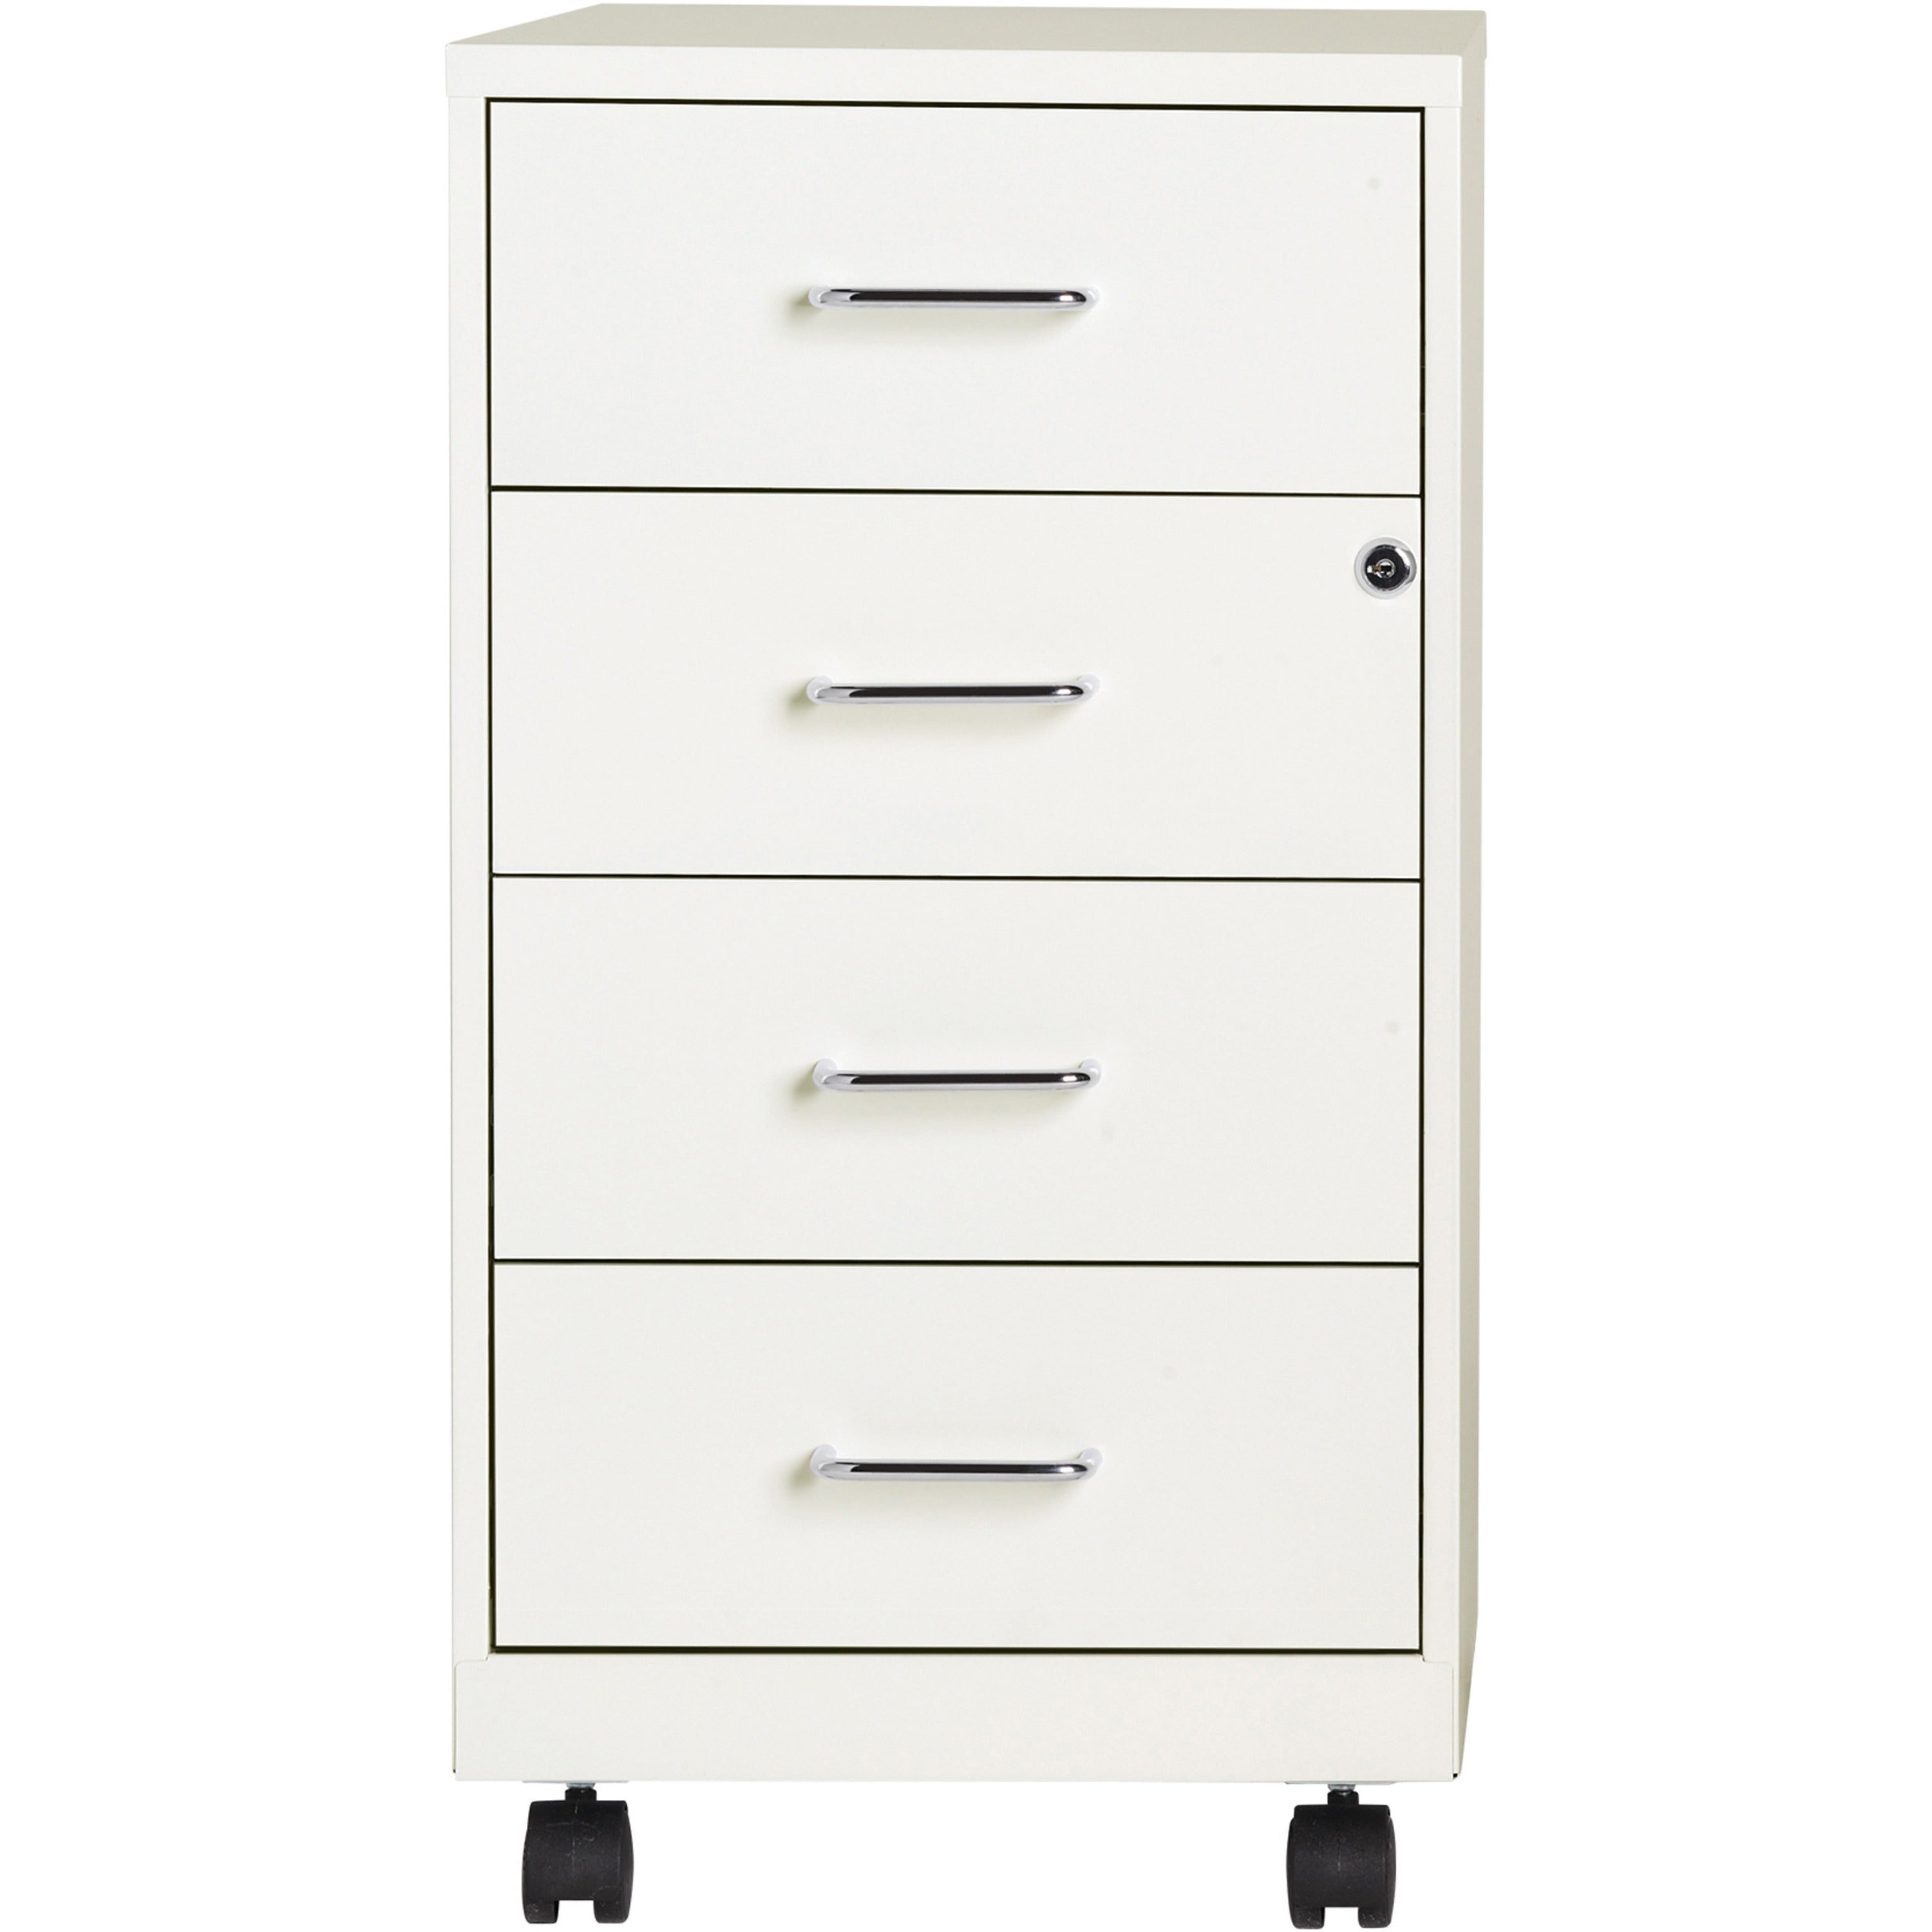 nusparc-mobile-storage-cabinet-142-x-18-x-265-4-x-drawers-letter-legal-mobility-glide-suspension-anti-tip-nonporous-surface-cam-lock-3-4-drawer-extension-white-painted-steel-recycled_nprvf418dmwe - 3